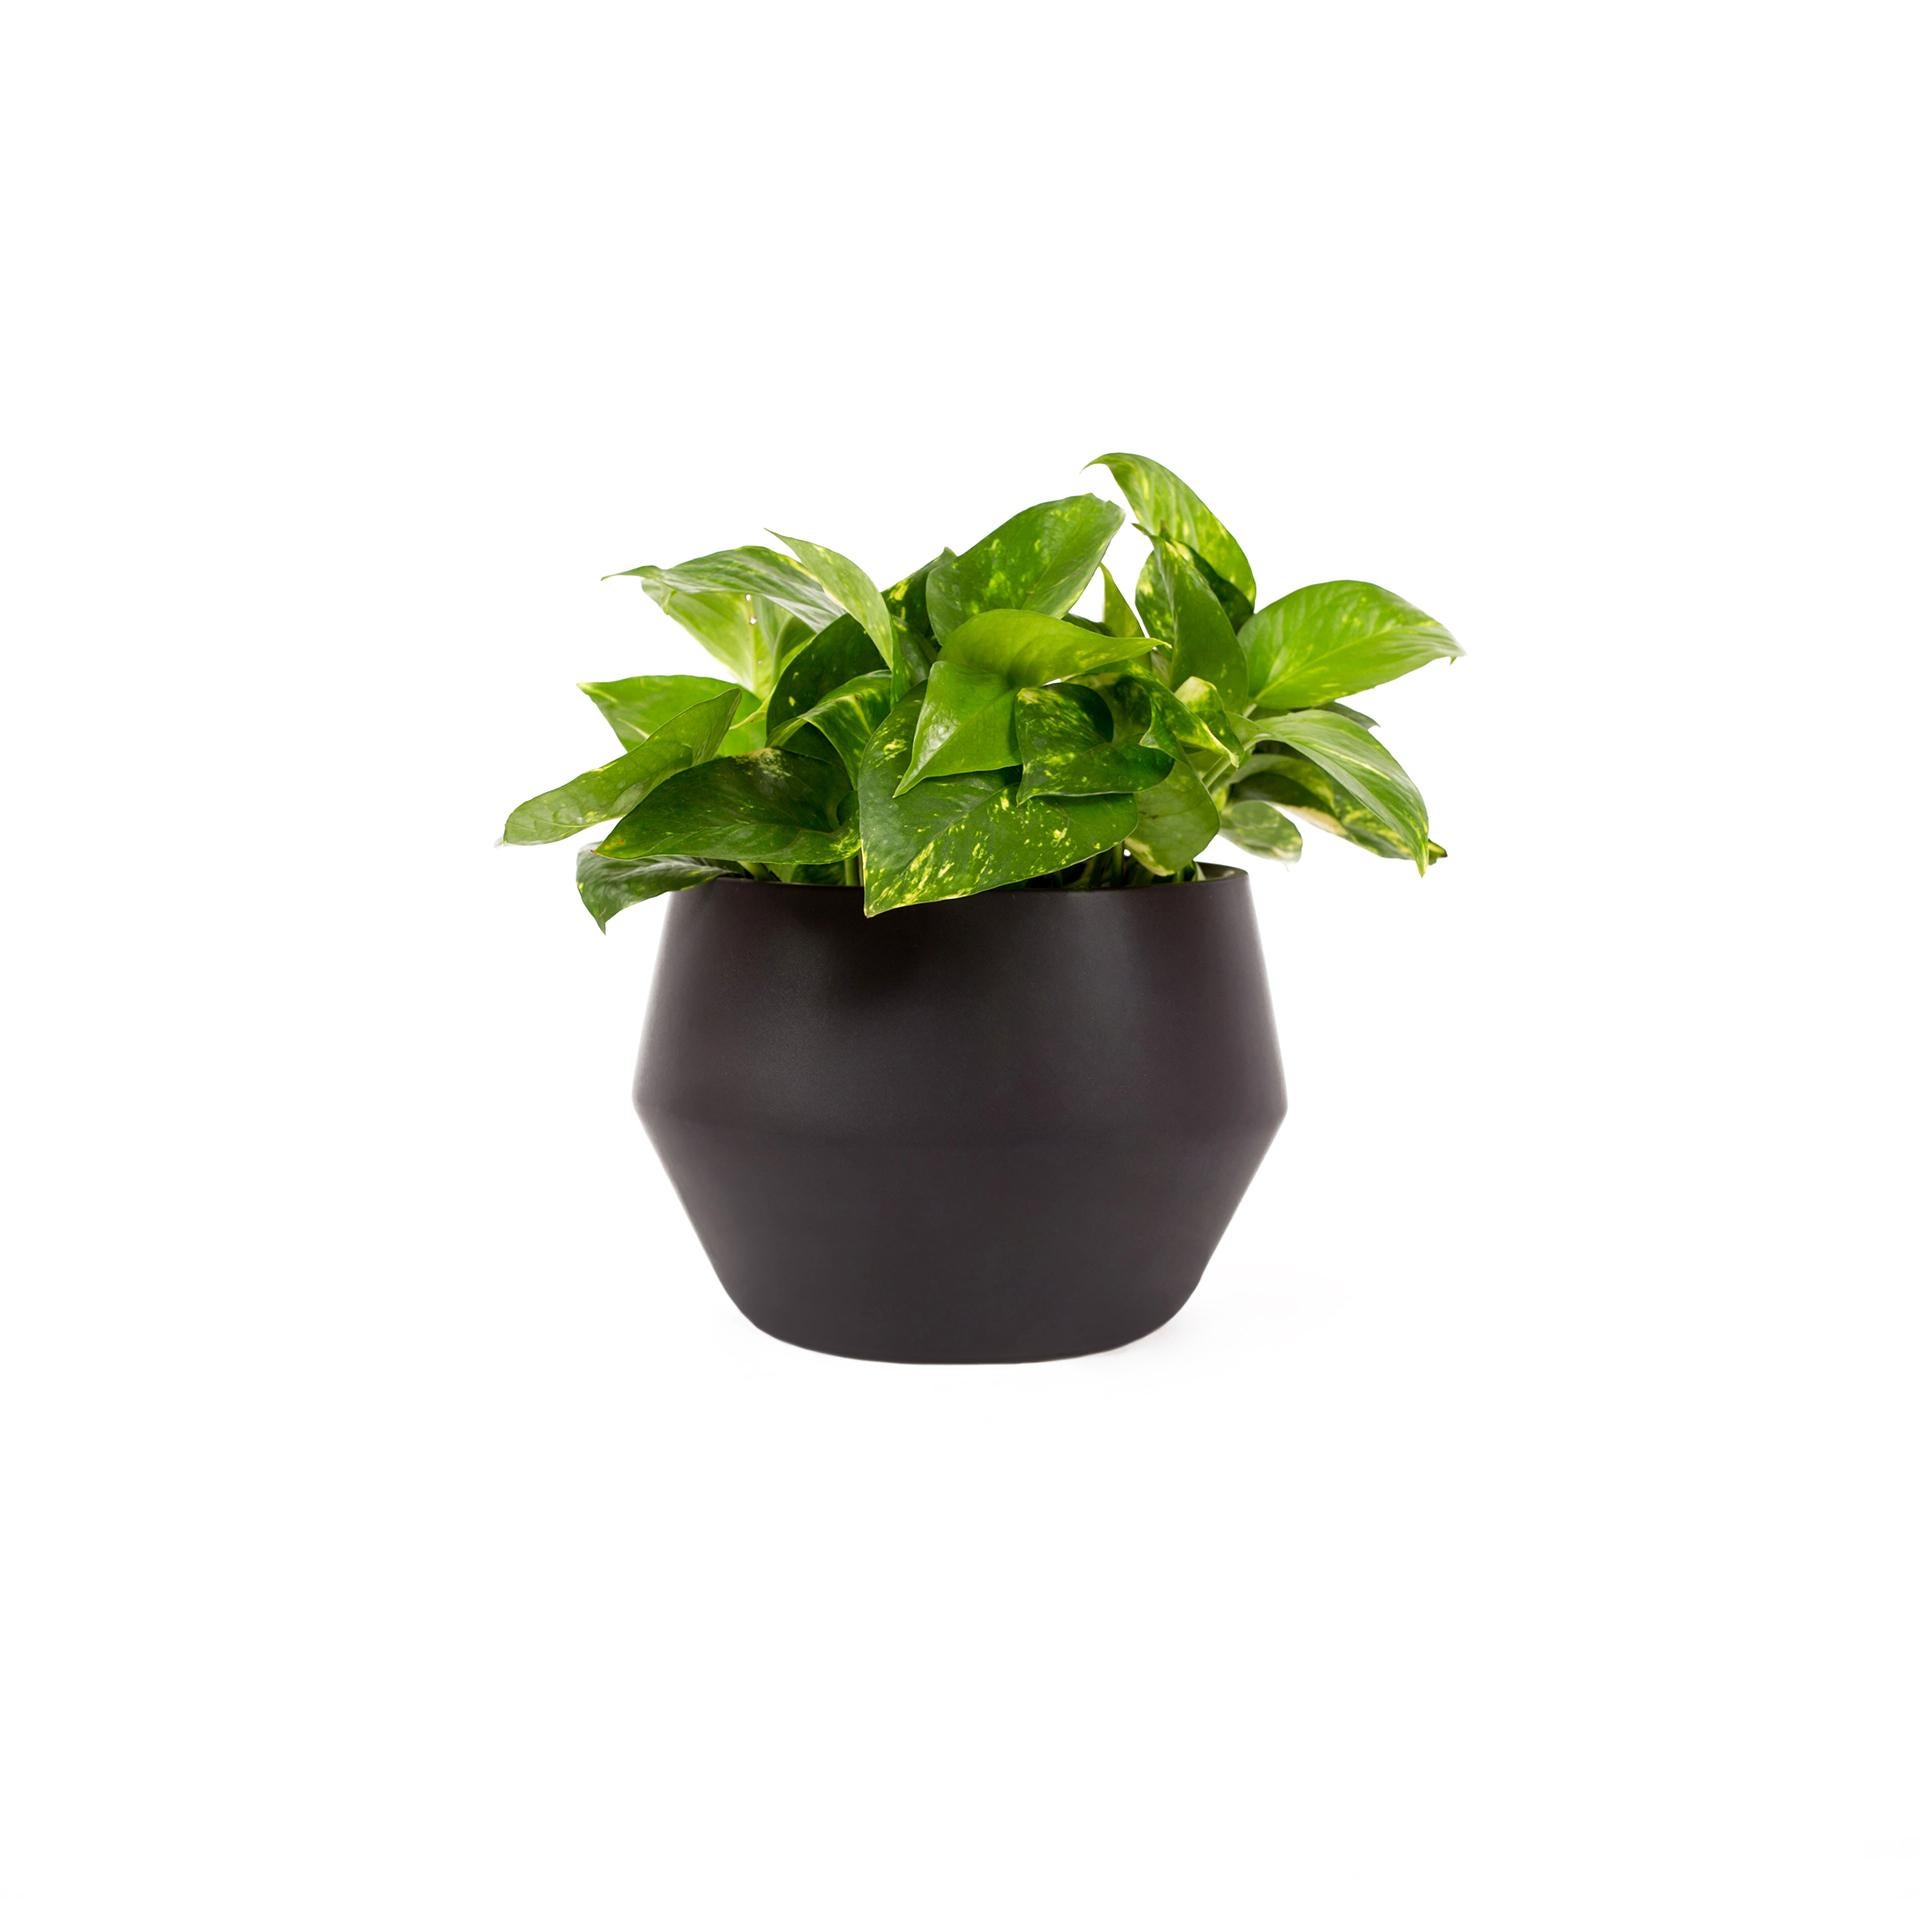 This diamond shaped planter come in 2 different colors (black and terracotta) and can be used in 3 different ways, as a stand, on top of a counter or table, and suspended by a cotton chord. The use depends on how the user interacts with the space